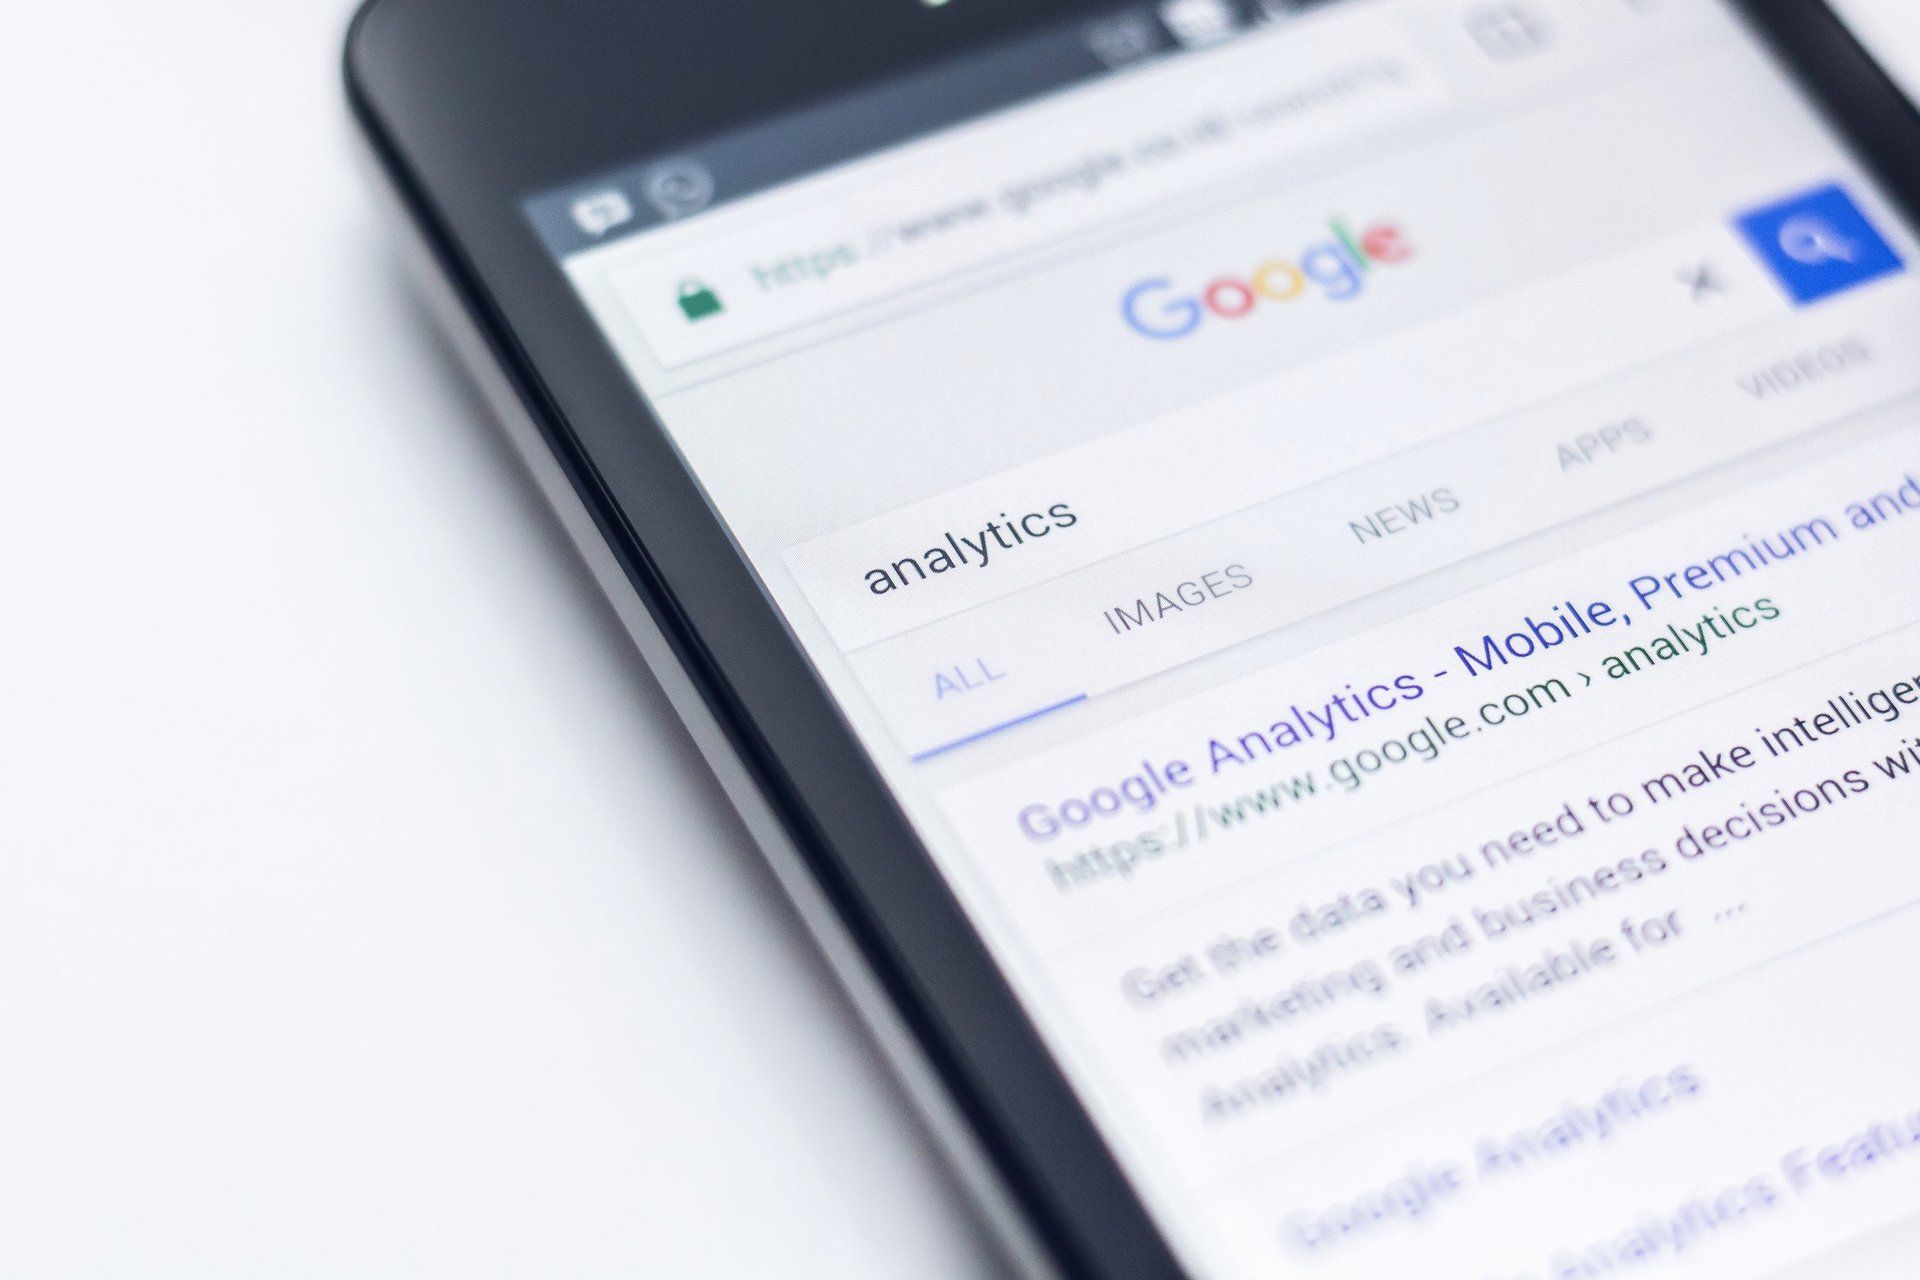 Google Search for Mobile Websites